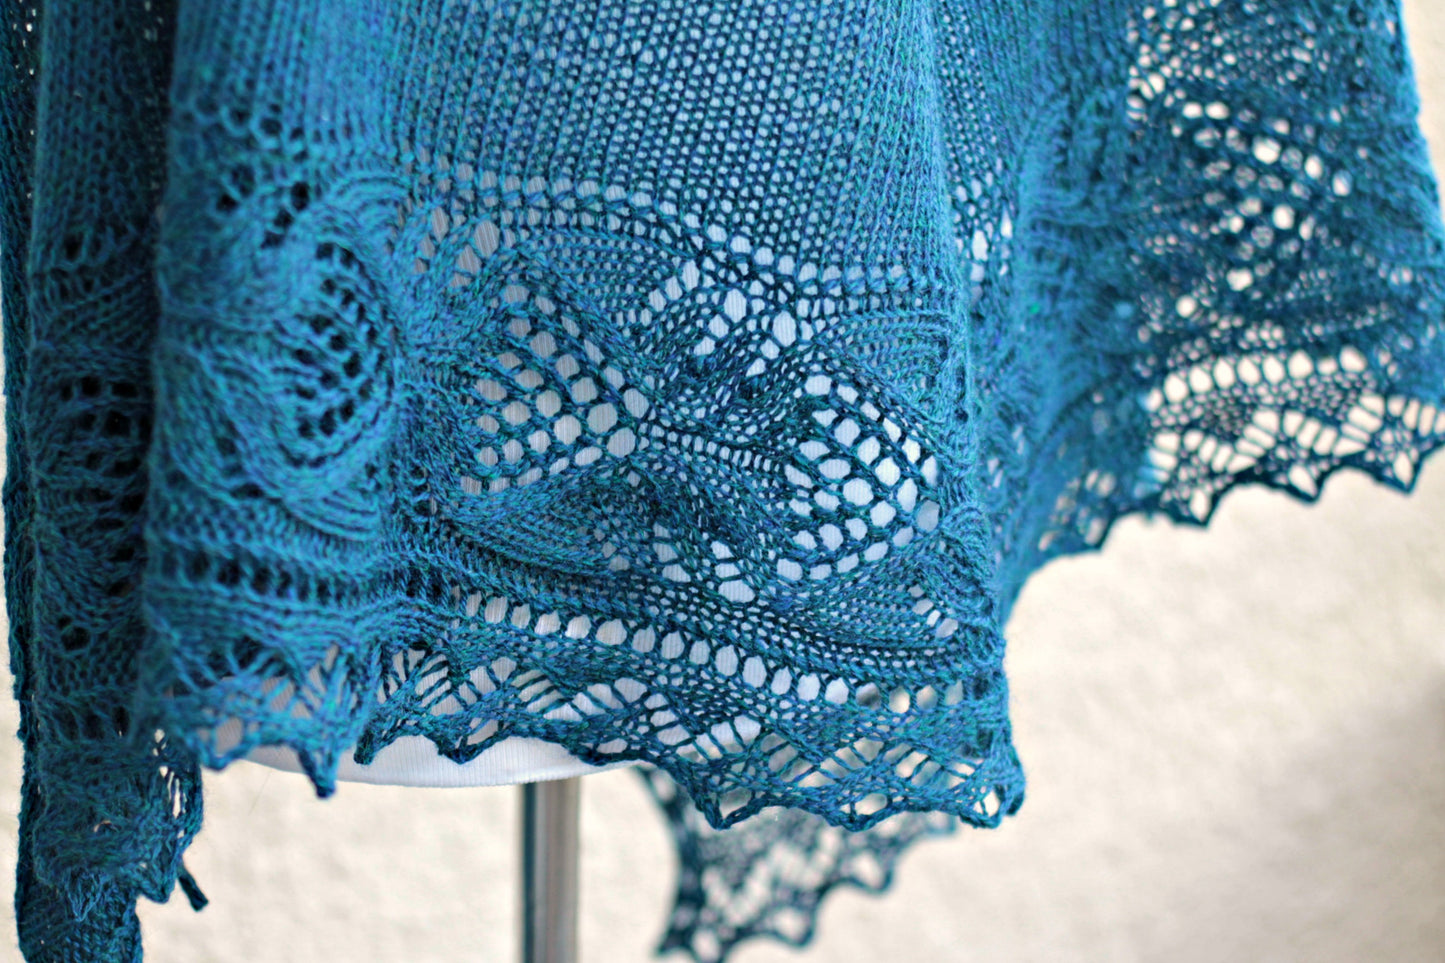 Teal knit shawl woth lace edge